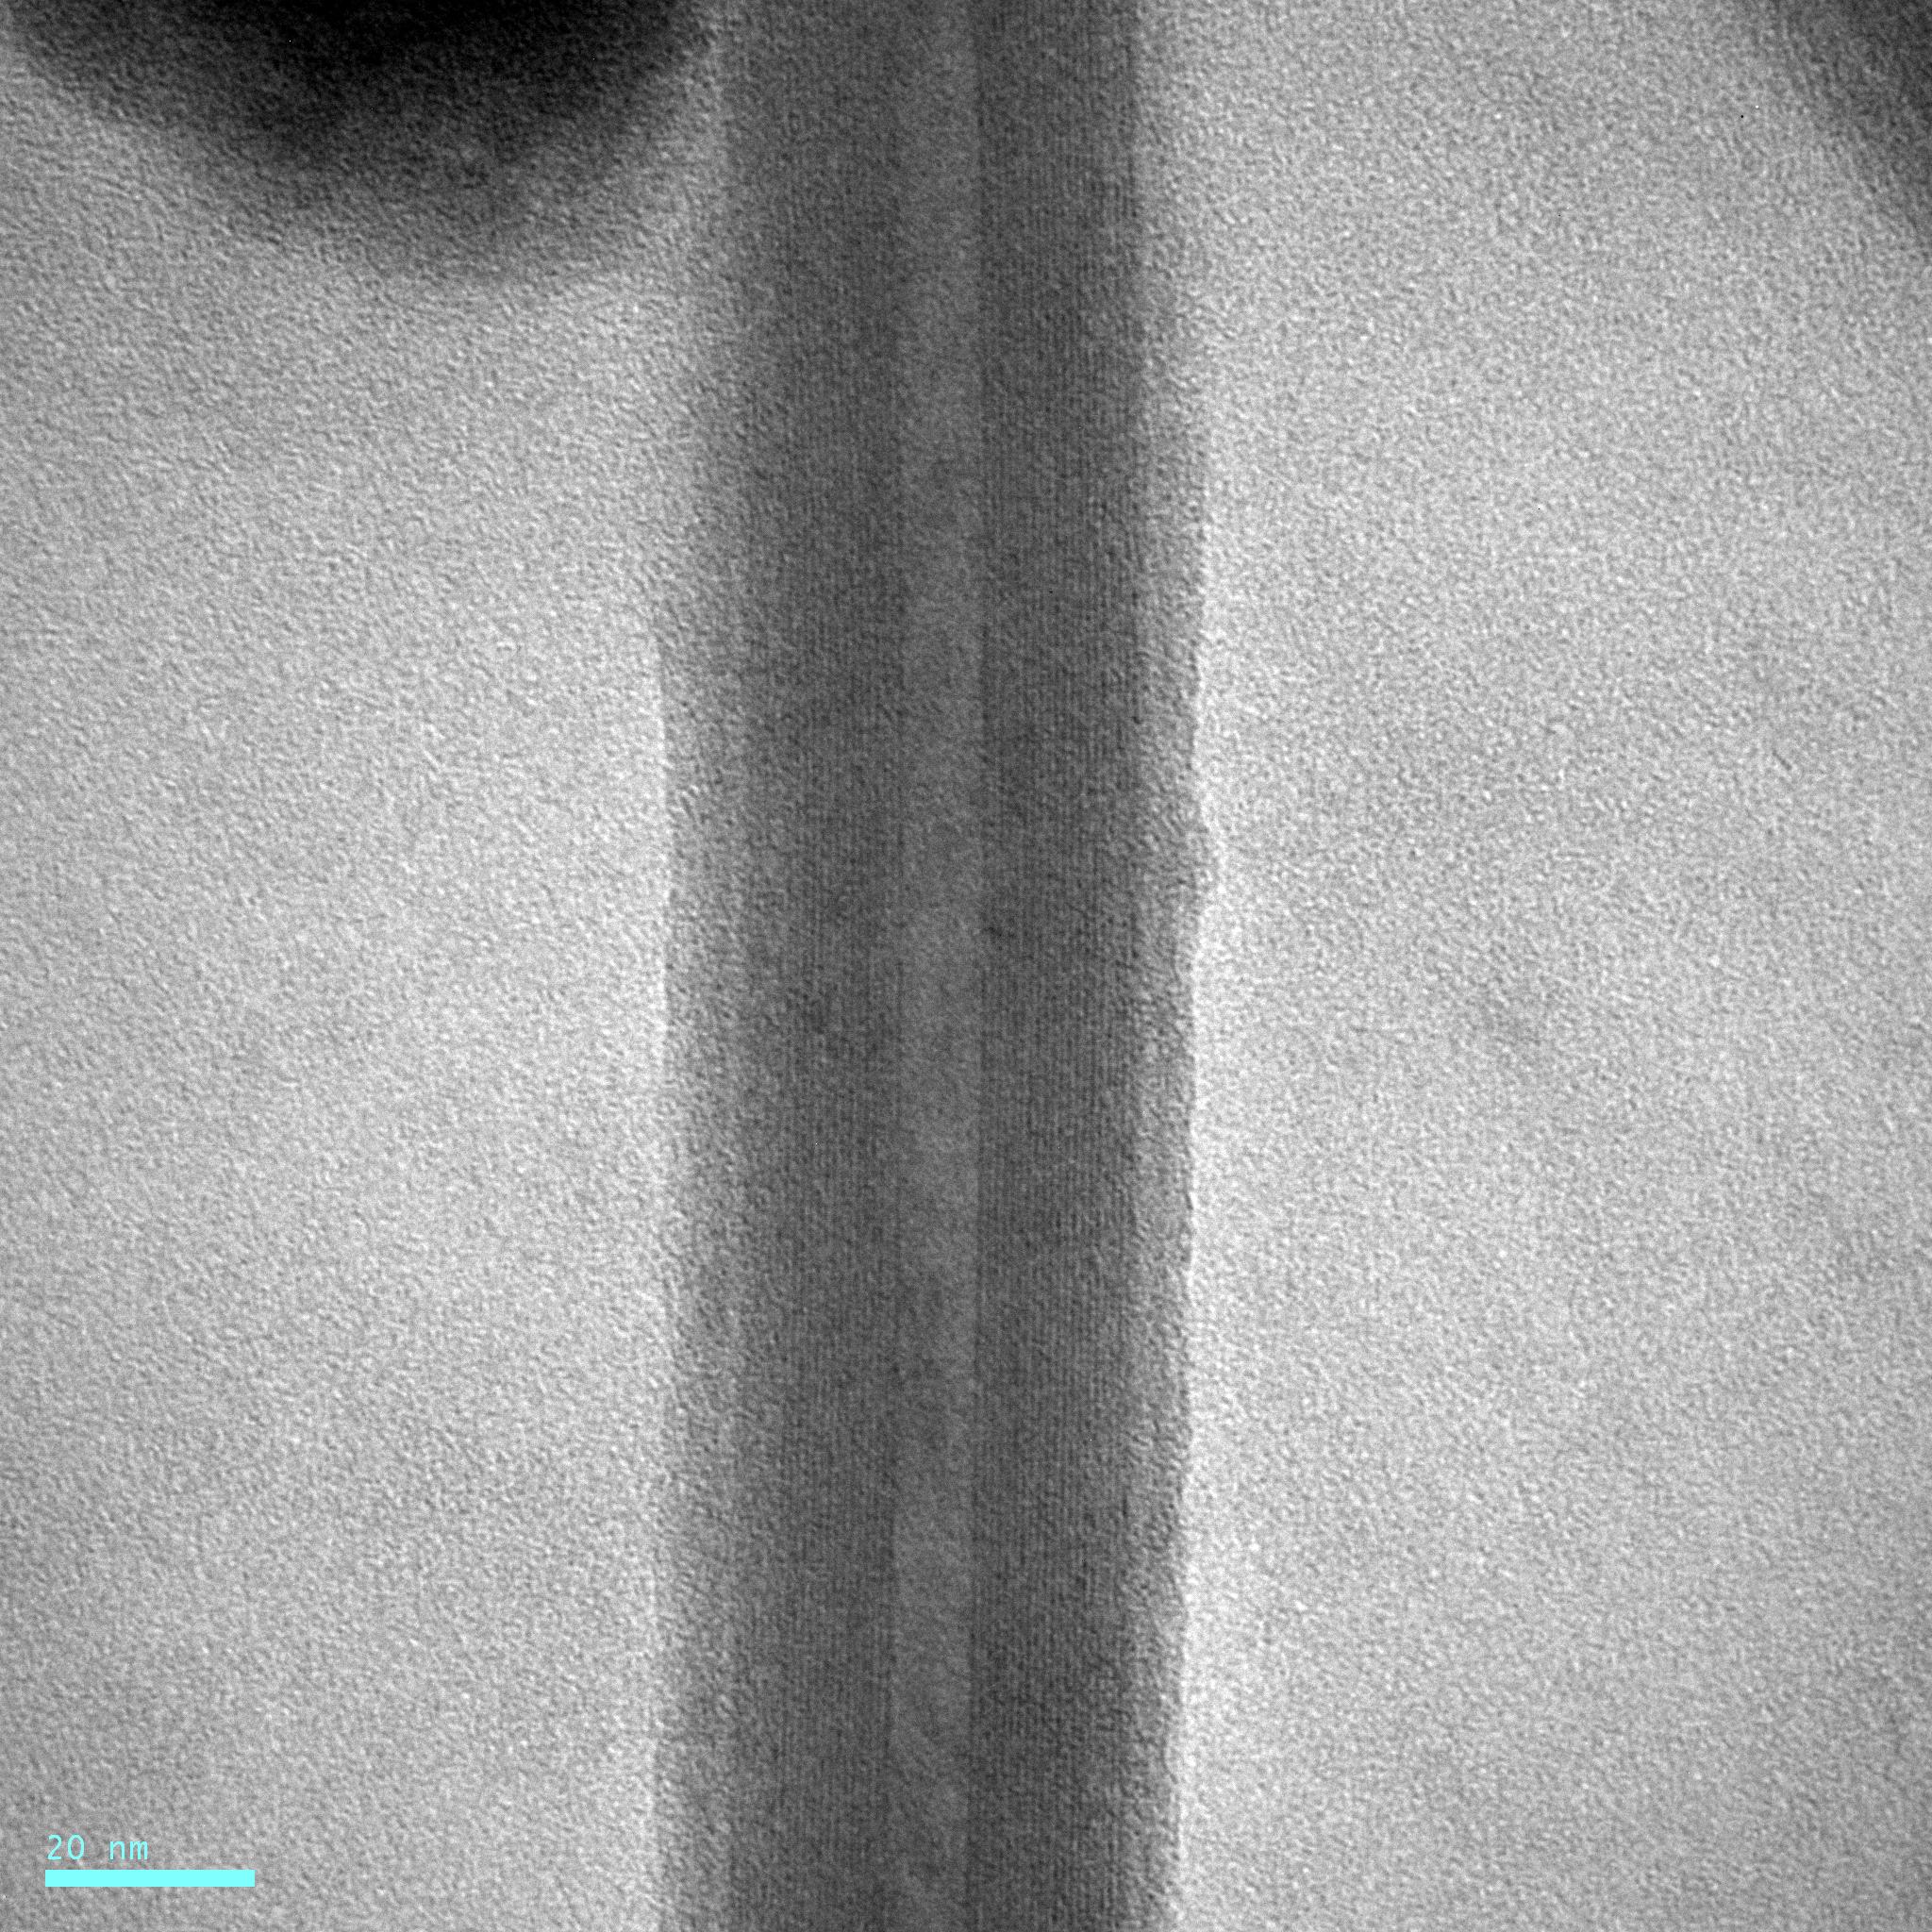 high-resolution TEM image of concentric crystal sheets in Chrysotile asbestos from water sample